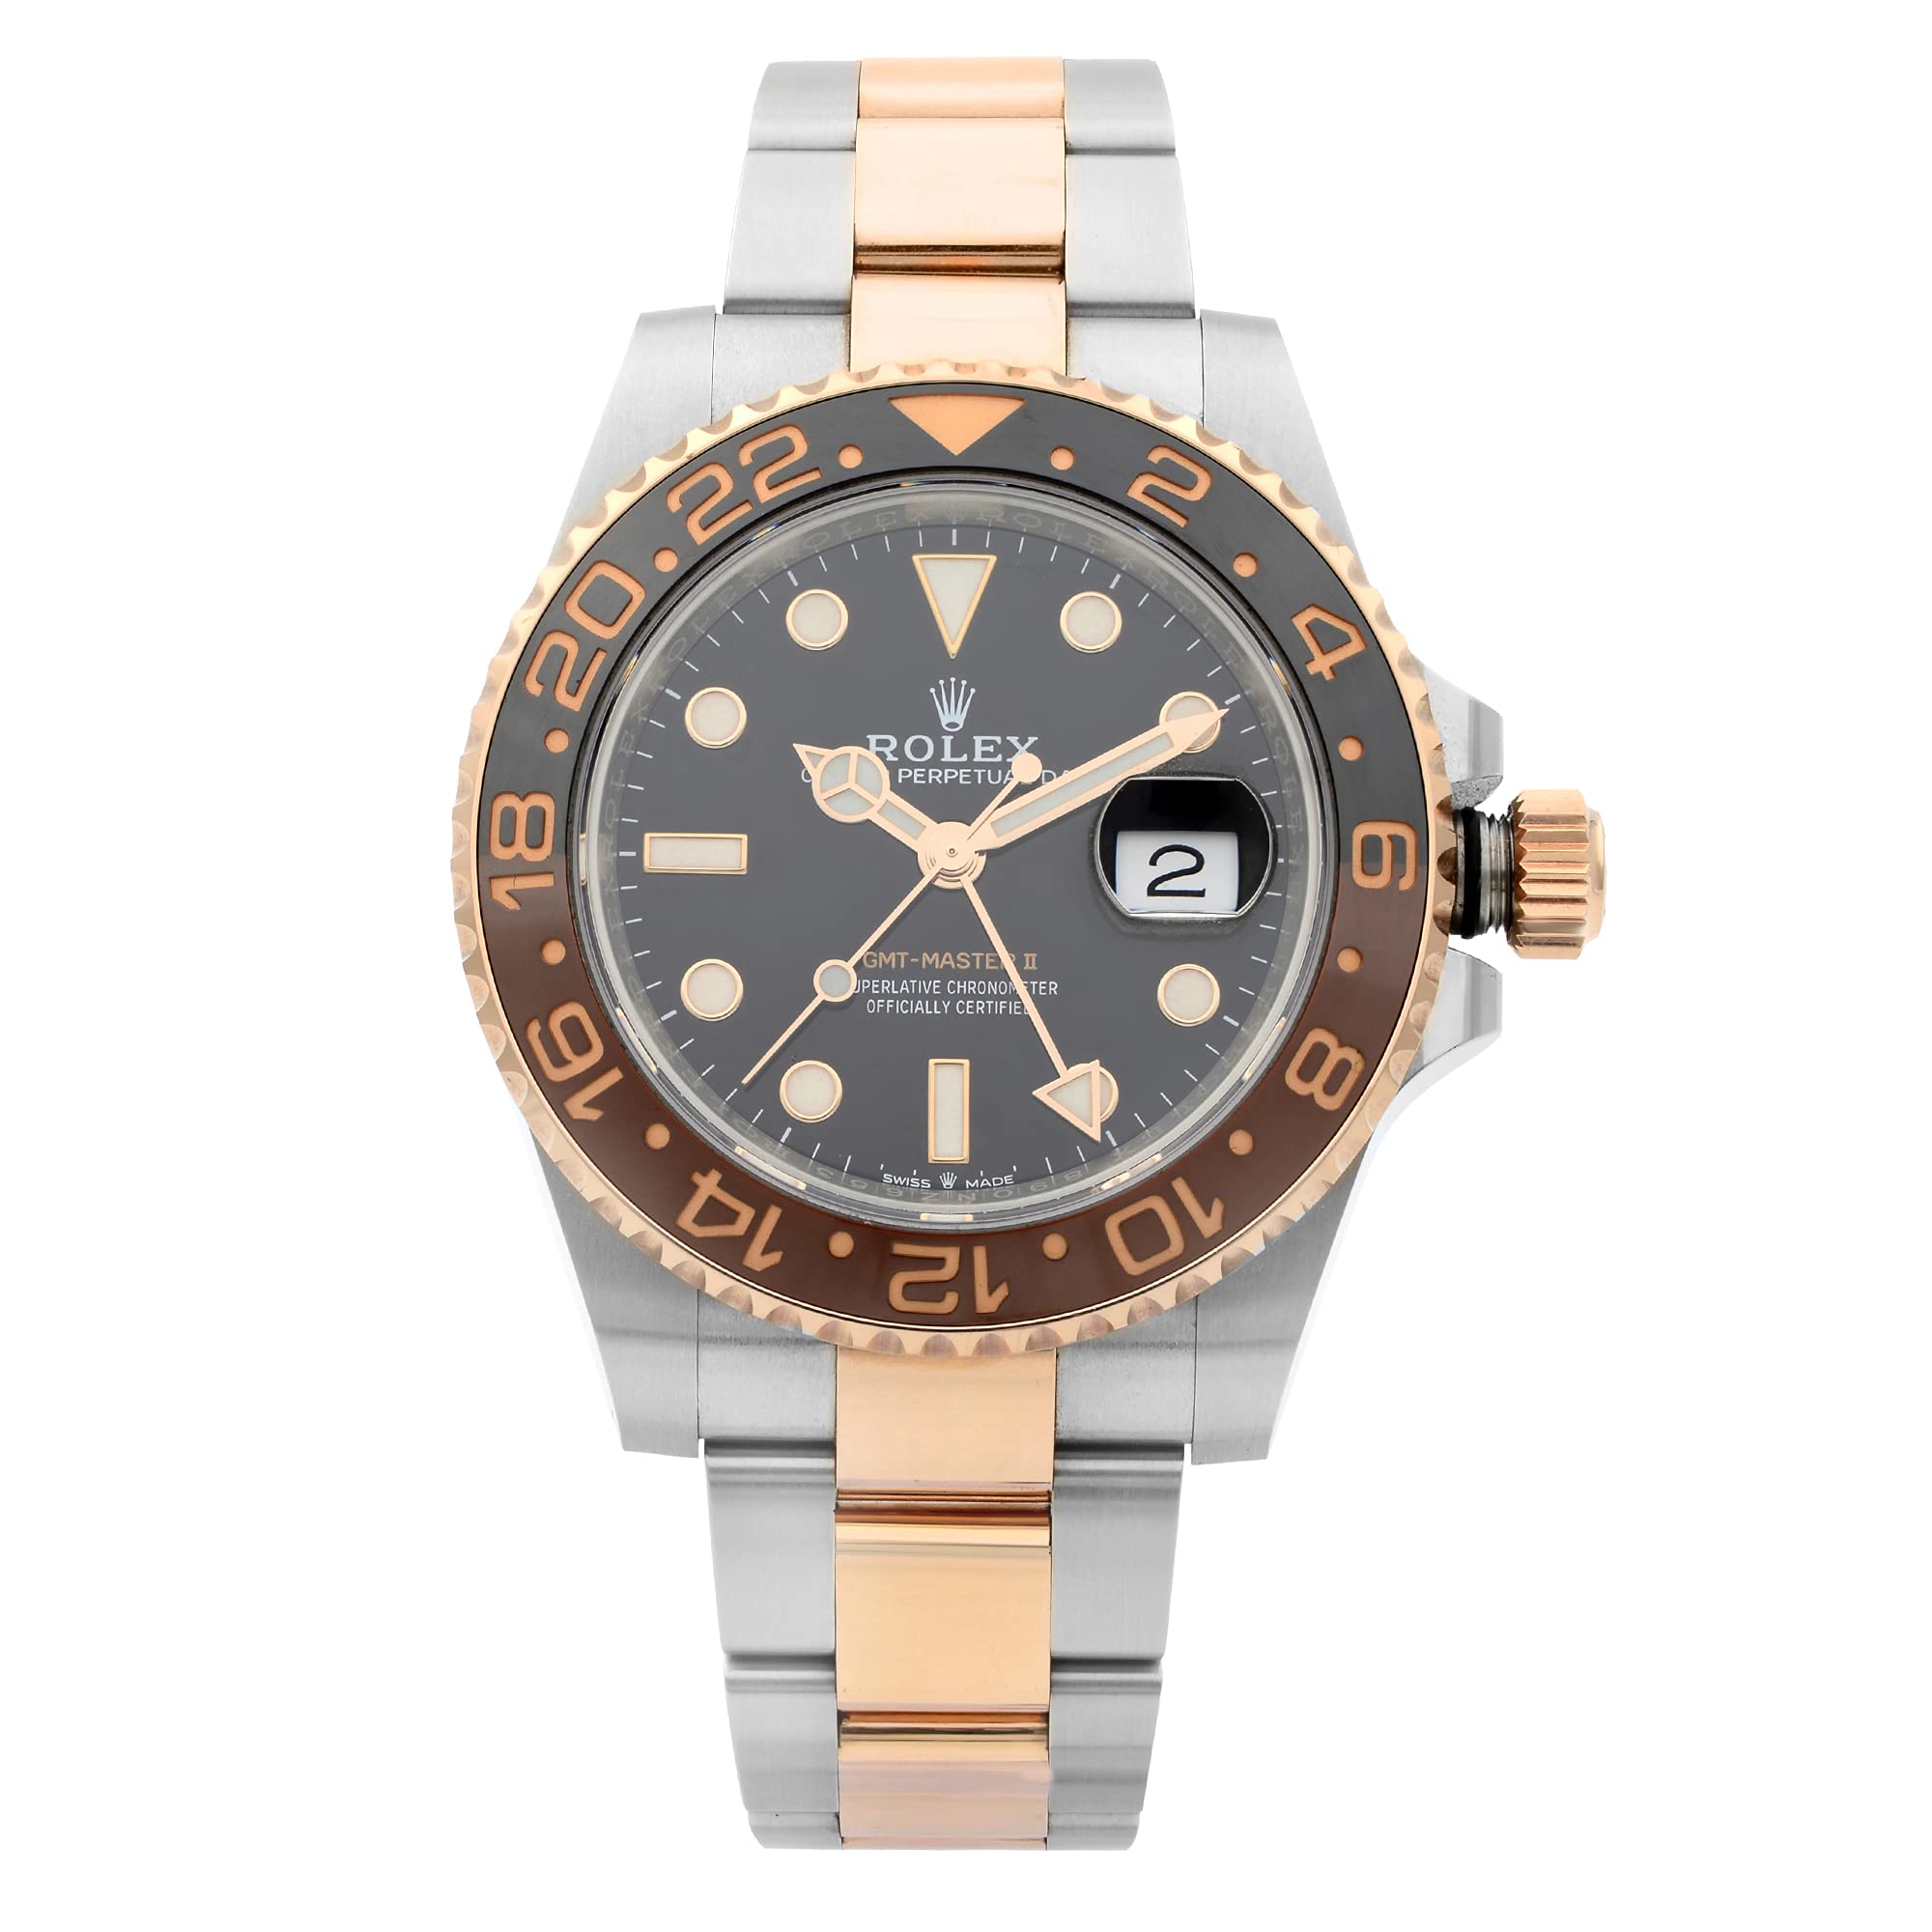 Rolex GMT-Master II Black Dial Automatic Stainless Steel and 18kt Rose Gold 126711CHNR